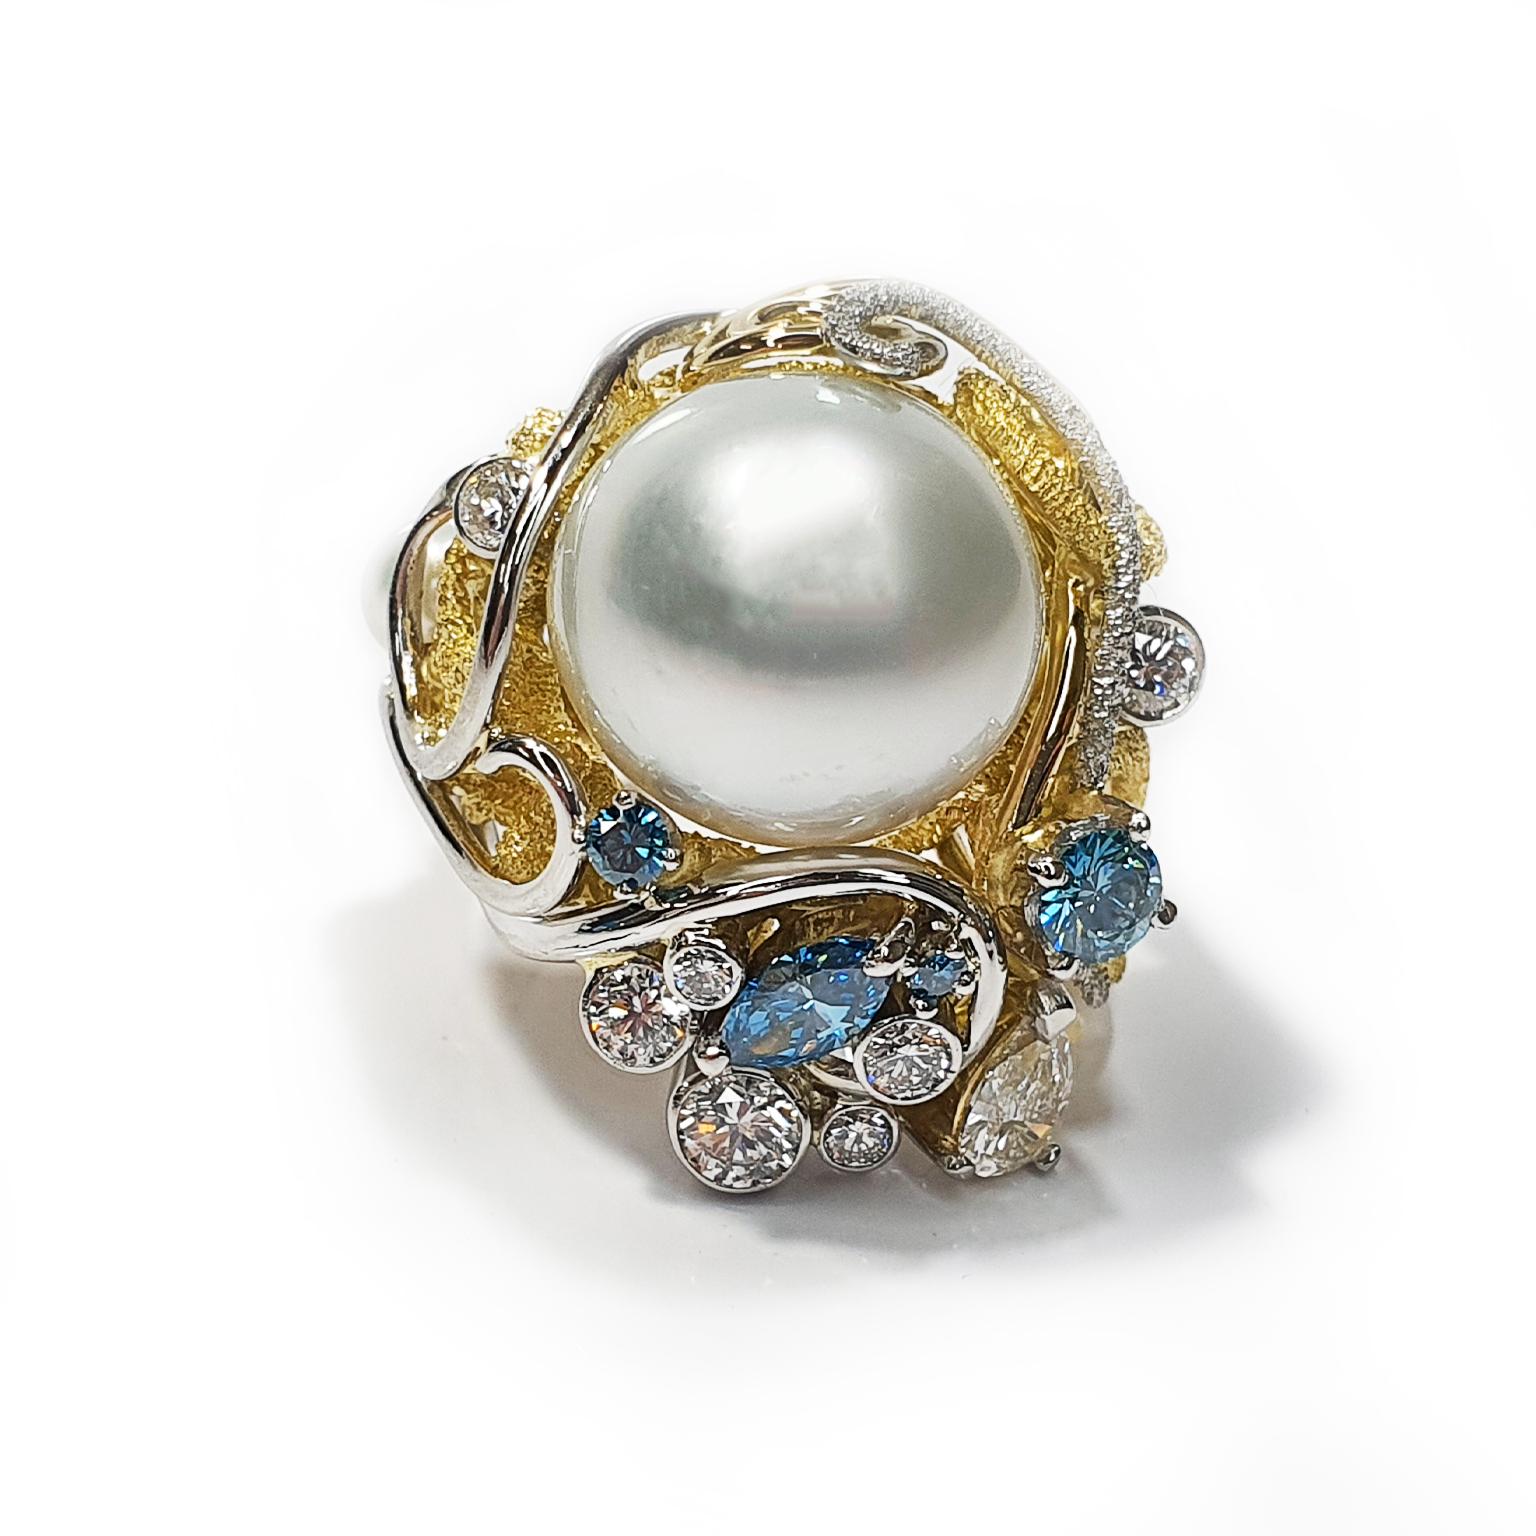 The ring is titled “Harmony” encapsulating the flowing design, catching the movements of the water surging around coral with the pearl as a central feature and bringing into play the beautiful aqua tones of colour enhanced blue diamonds, personally